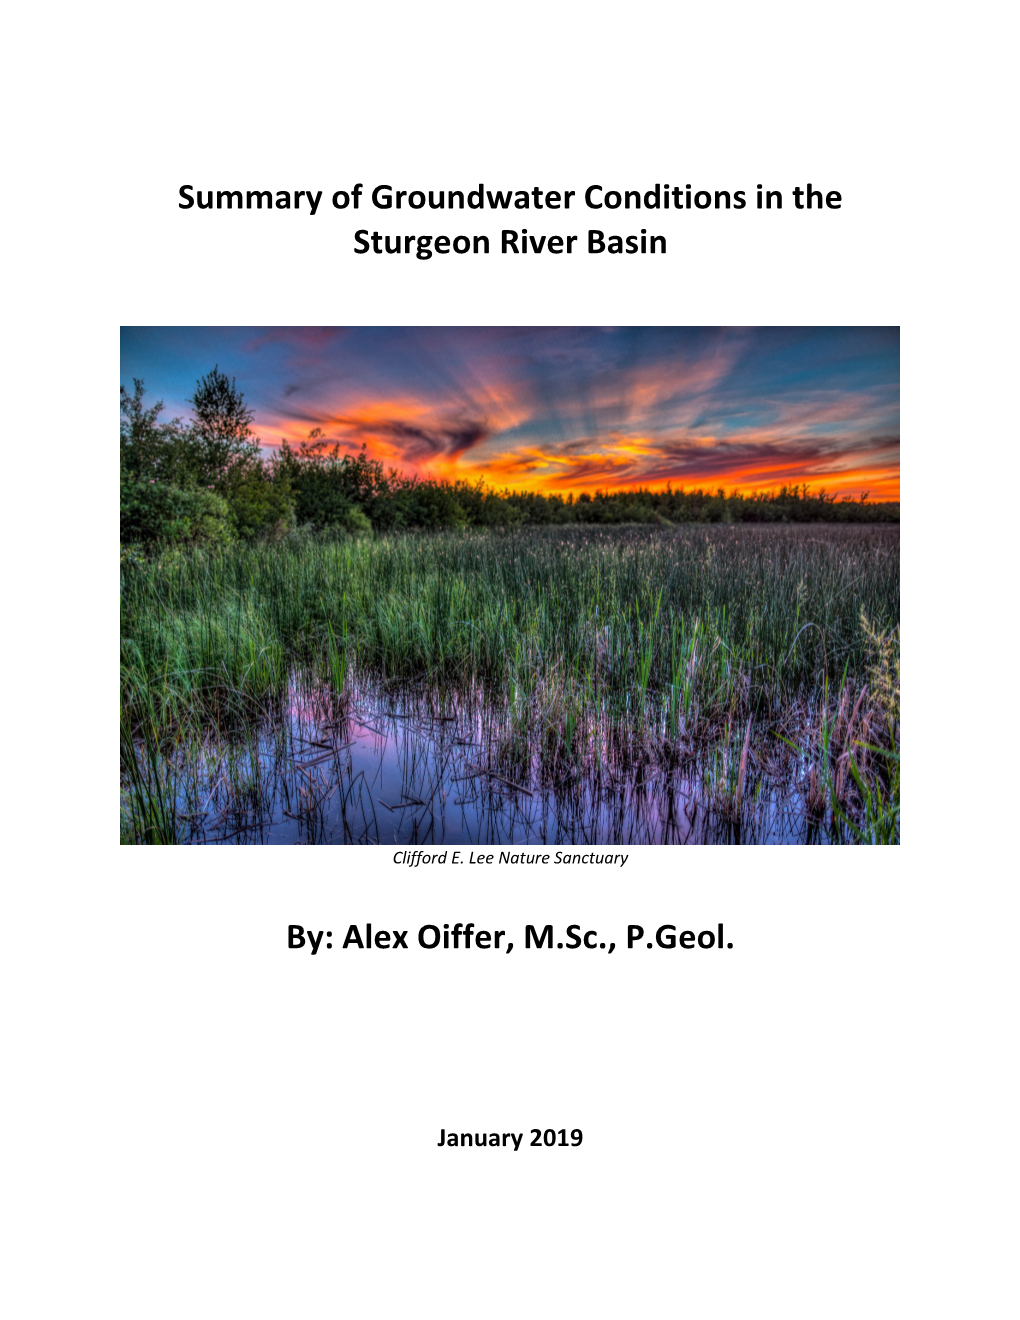 Summary of Groundwater Conditions in the Sturgeon River Basin By